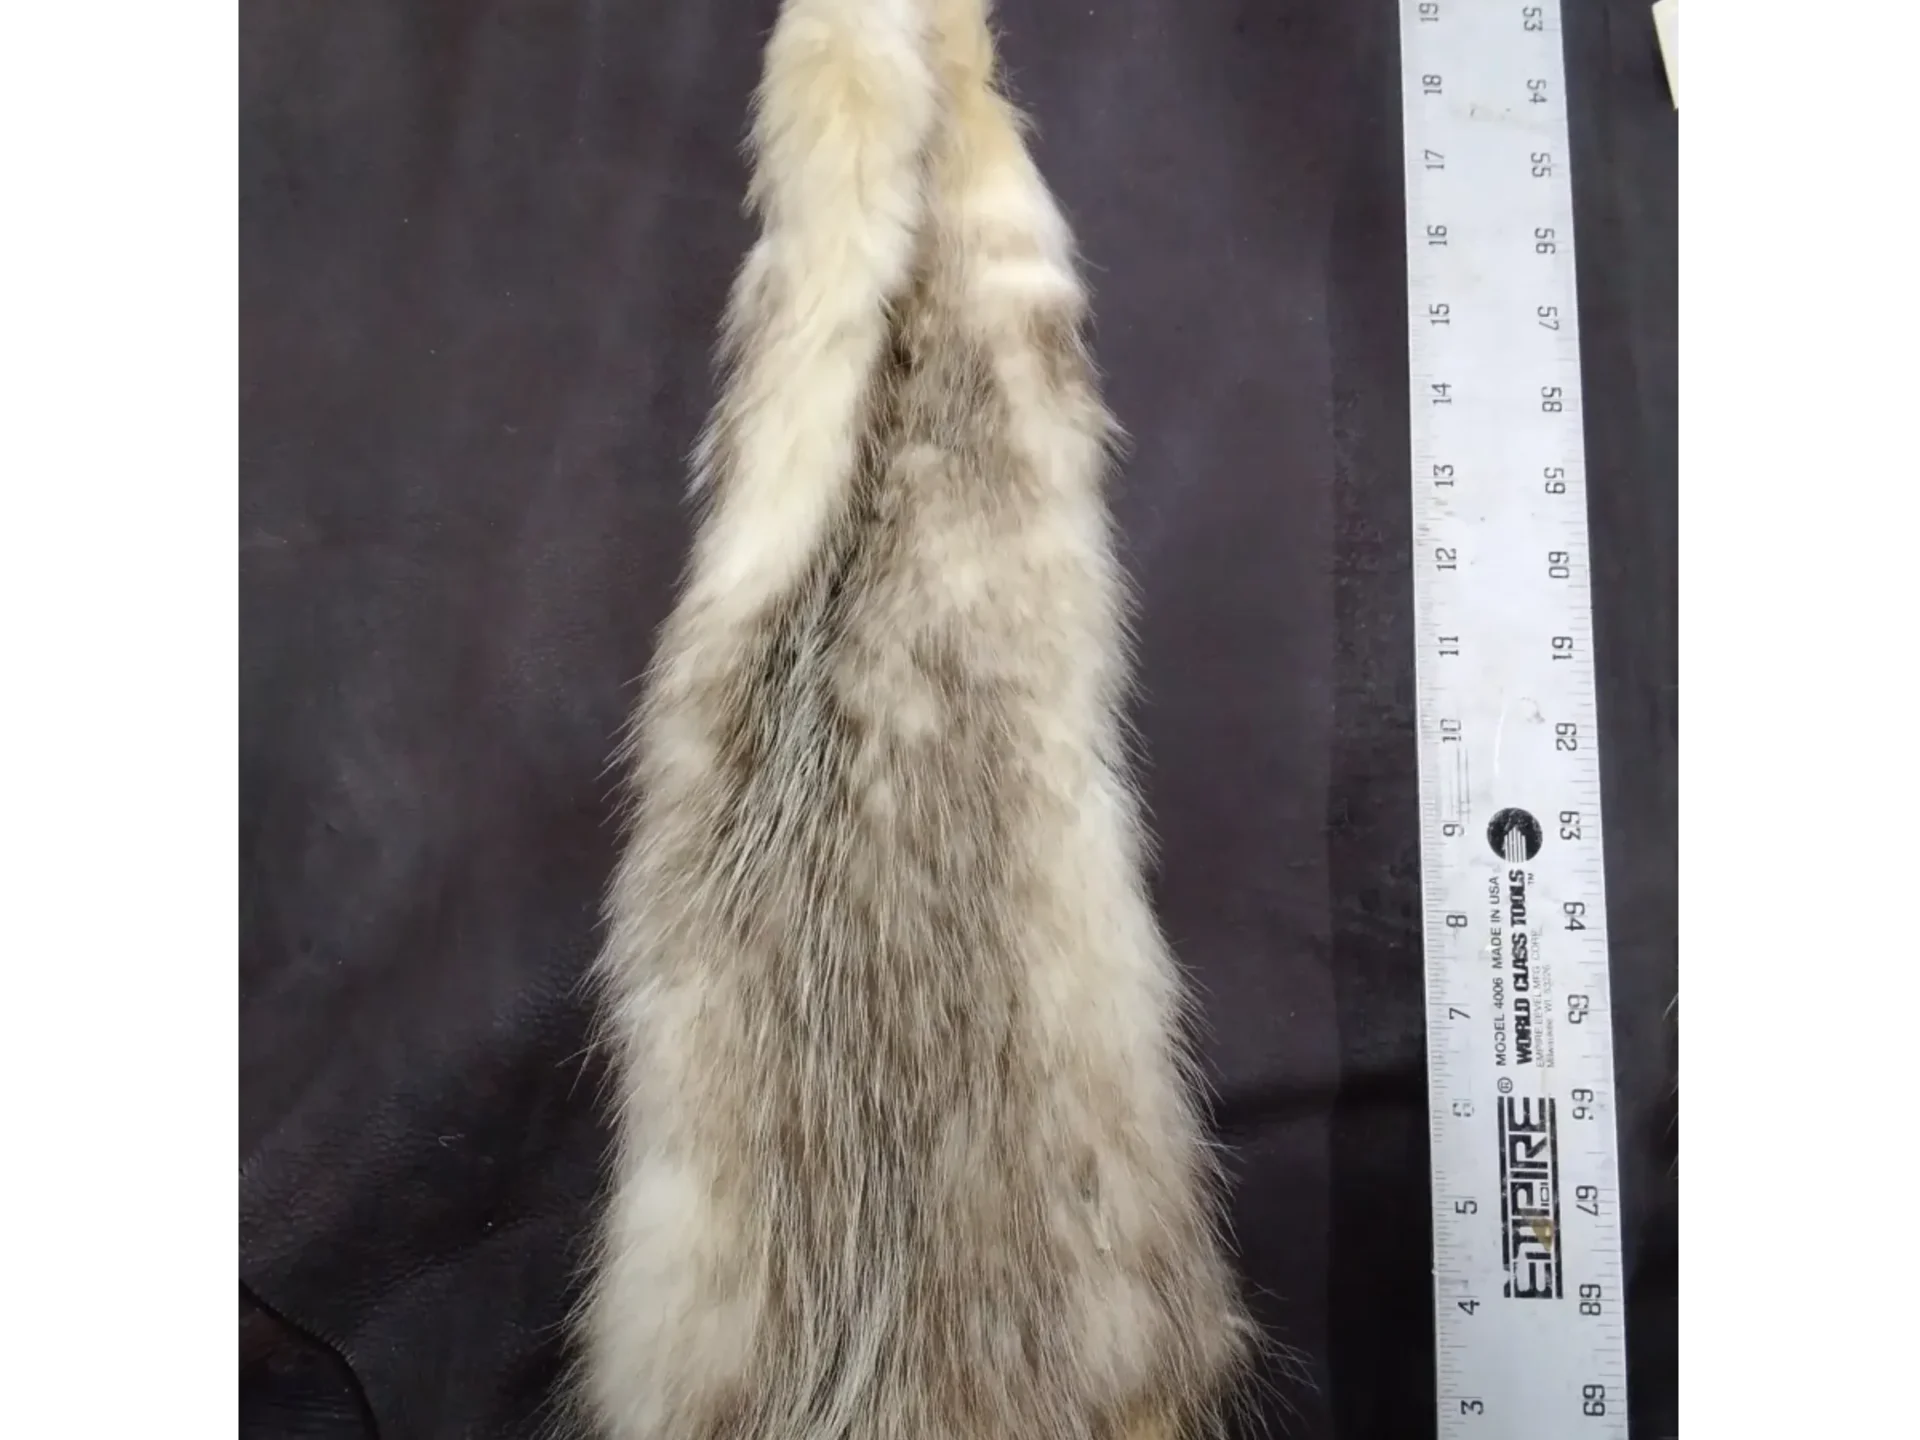 Nicely Tanned Tubed Hide Opossum Five, Pelts Collection